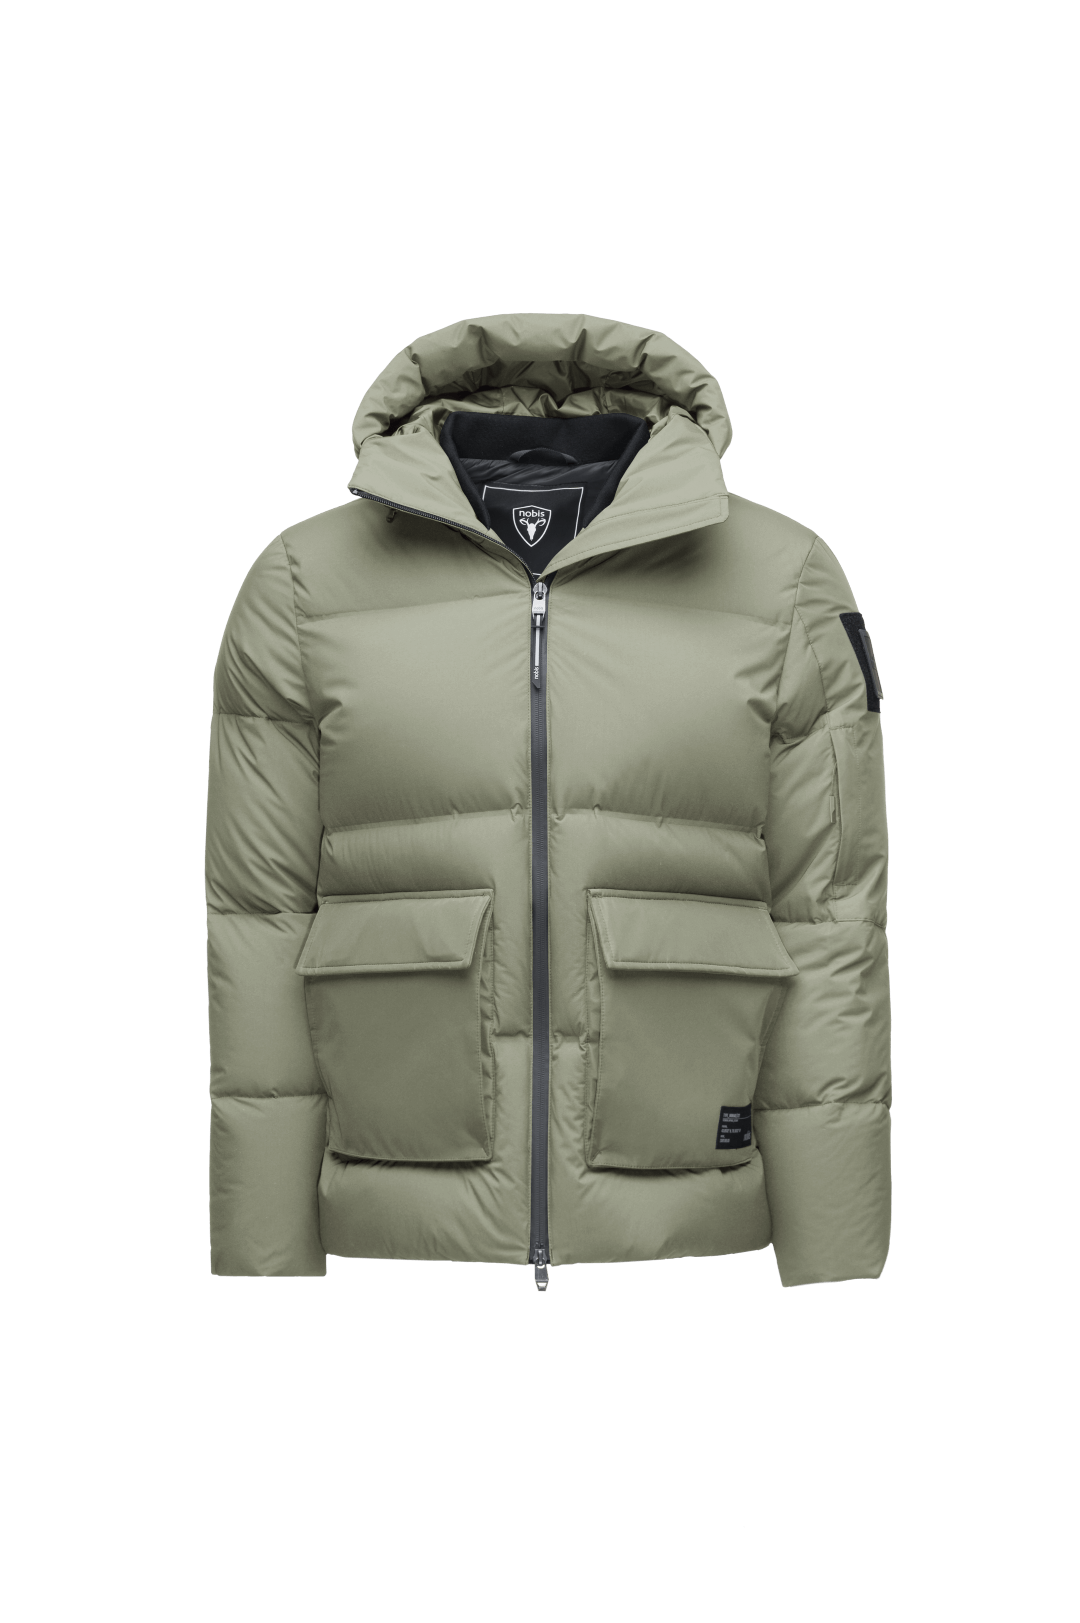 Supra Men's Performance Puffer in hip length, Technical Taffeta and 3-Ply Micro Denier fabrication, Premium Canadian White Duck Down insulation, non-removable down filled hood, centre front two-way zipper, flap pockets at waist, and zipper pocket at left bicep, in Clover